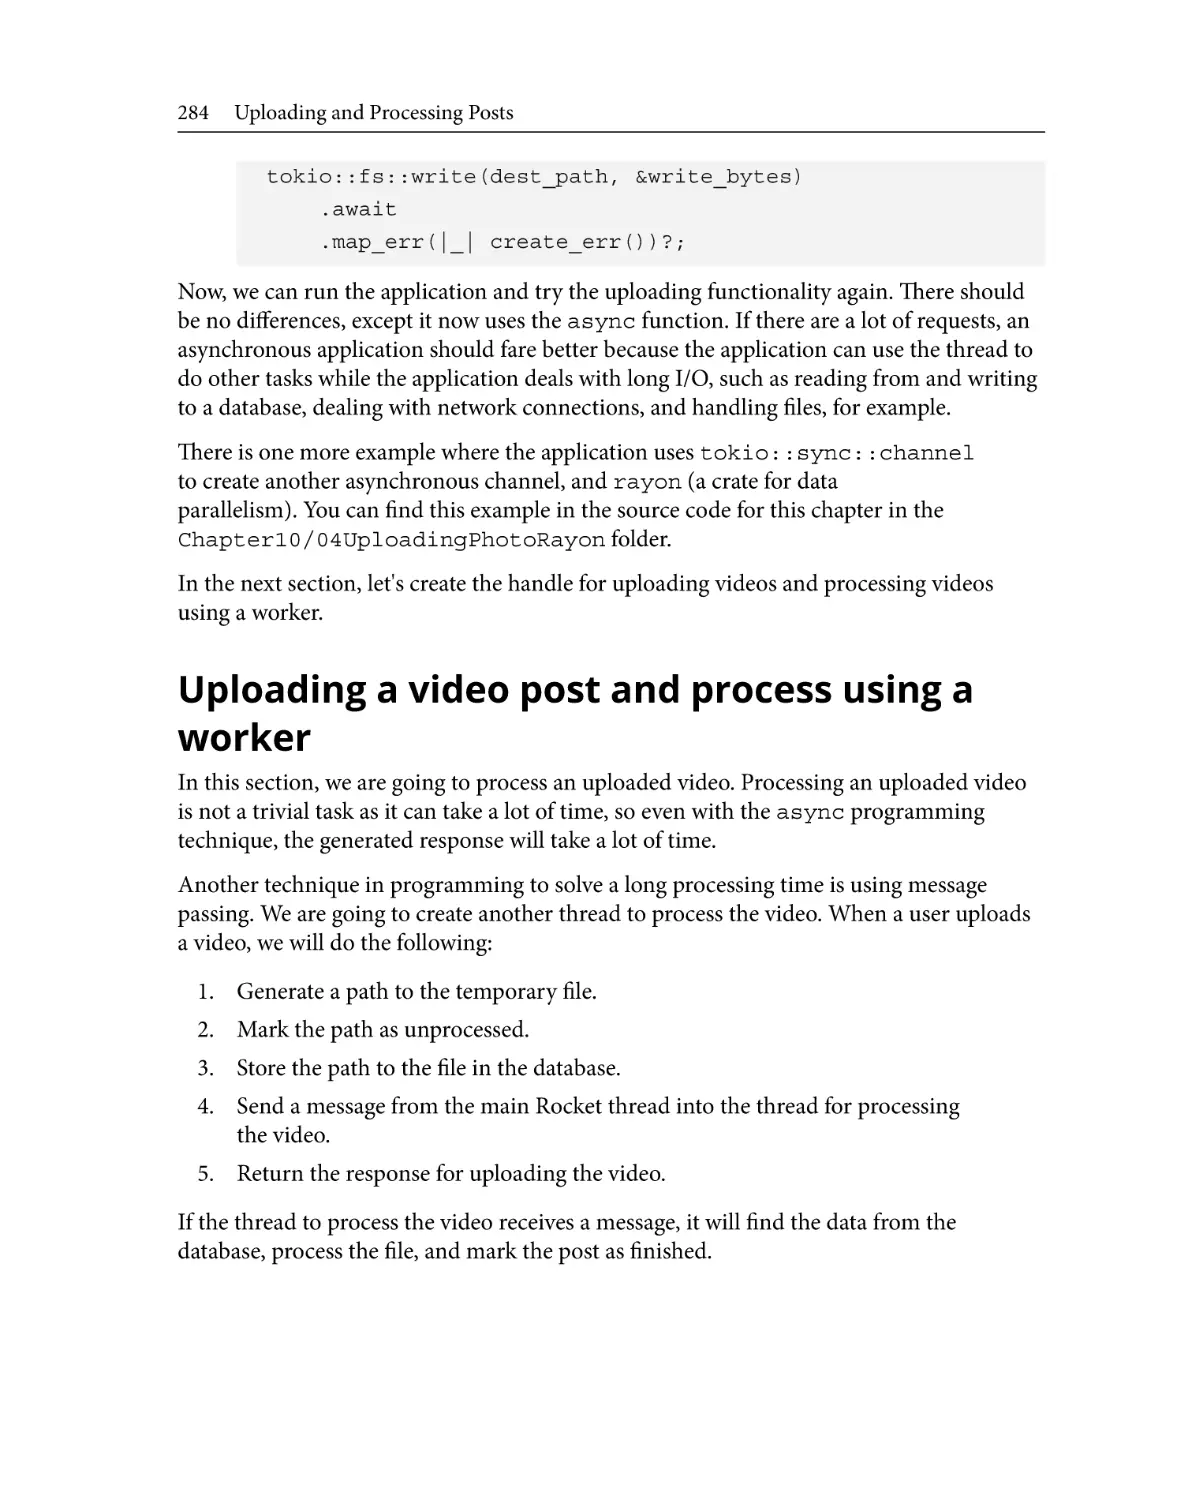 Uploading a video post and process using a worker